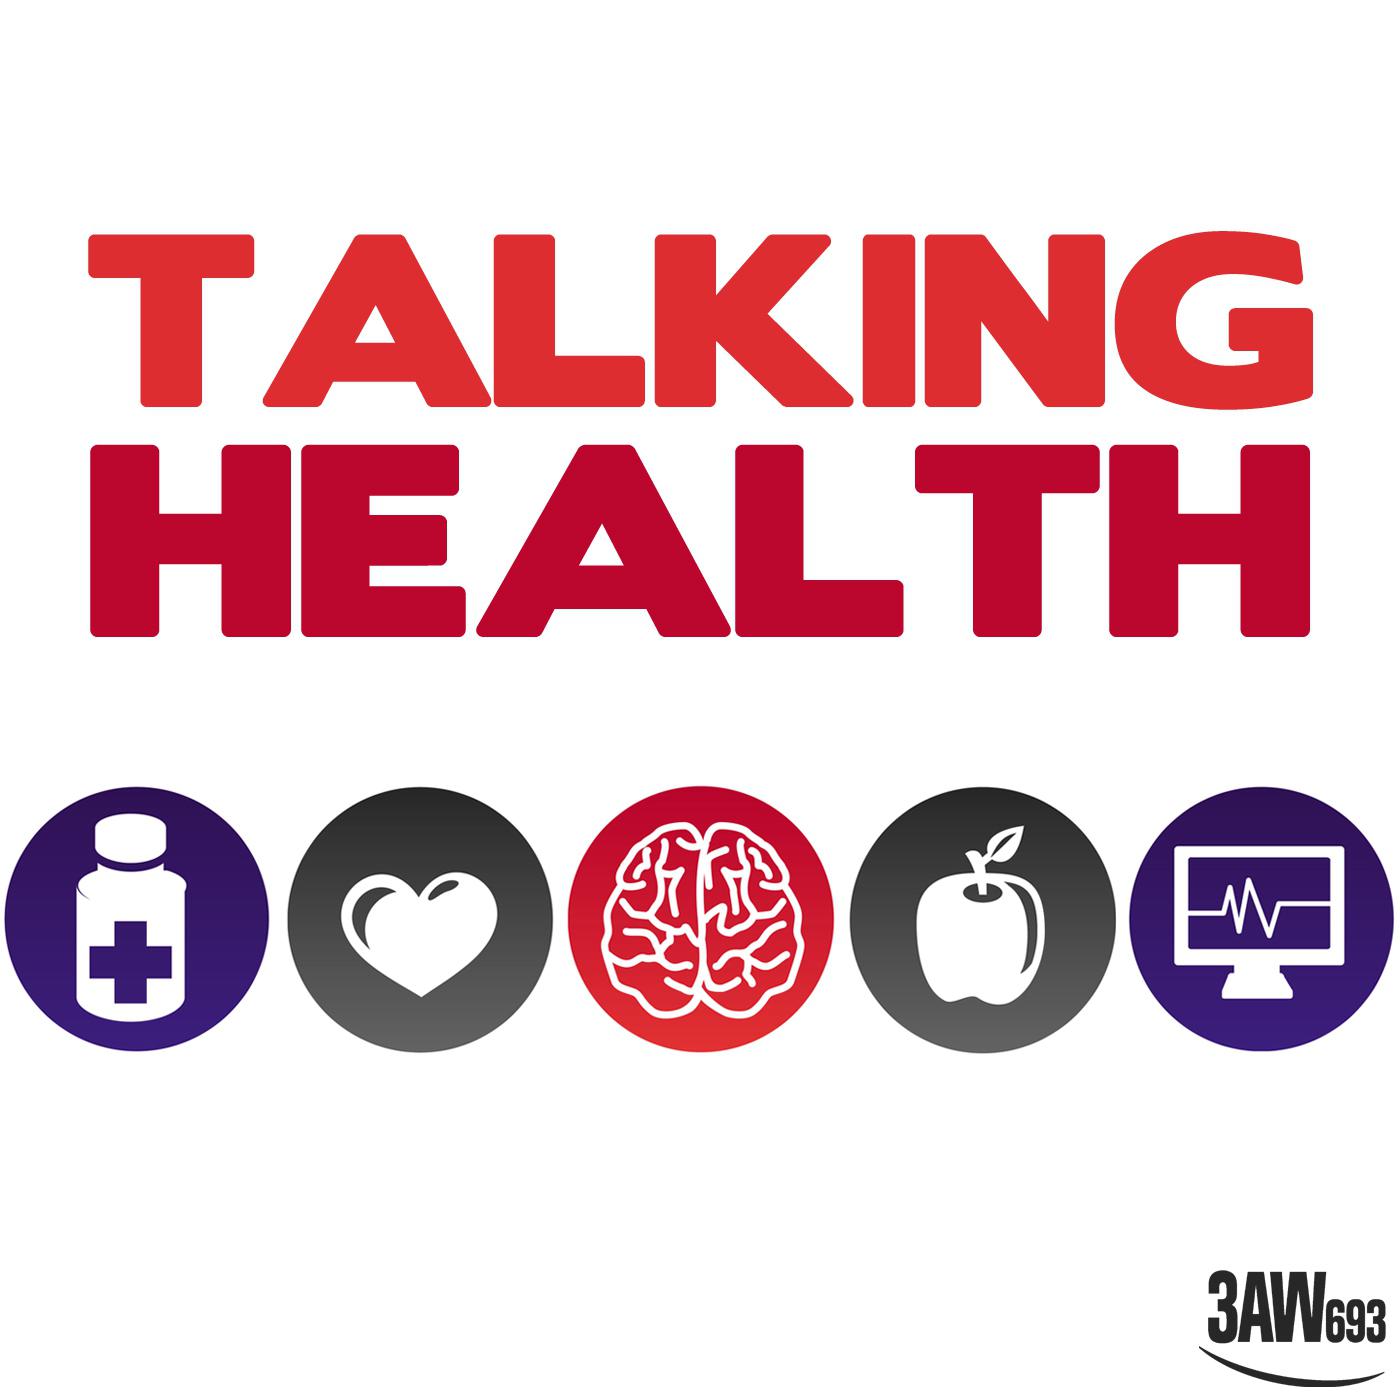 Talking Health - How will you have a healthier 2019? : December 30